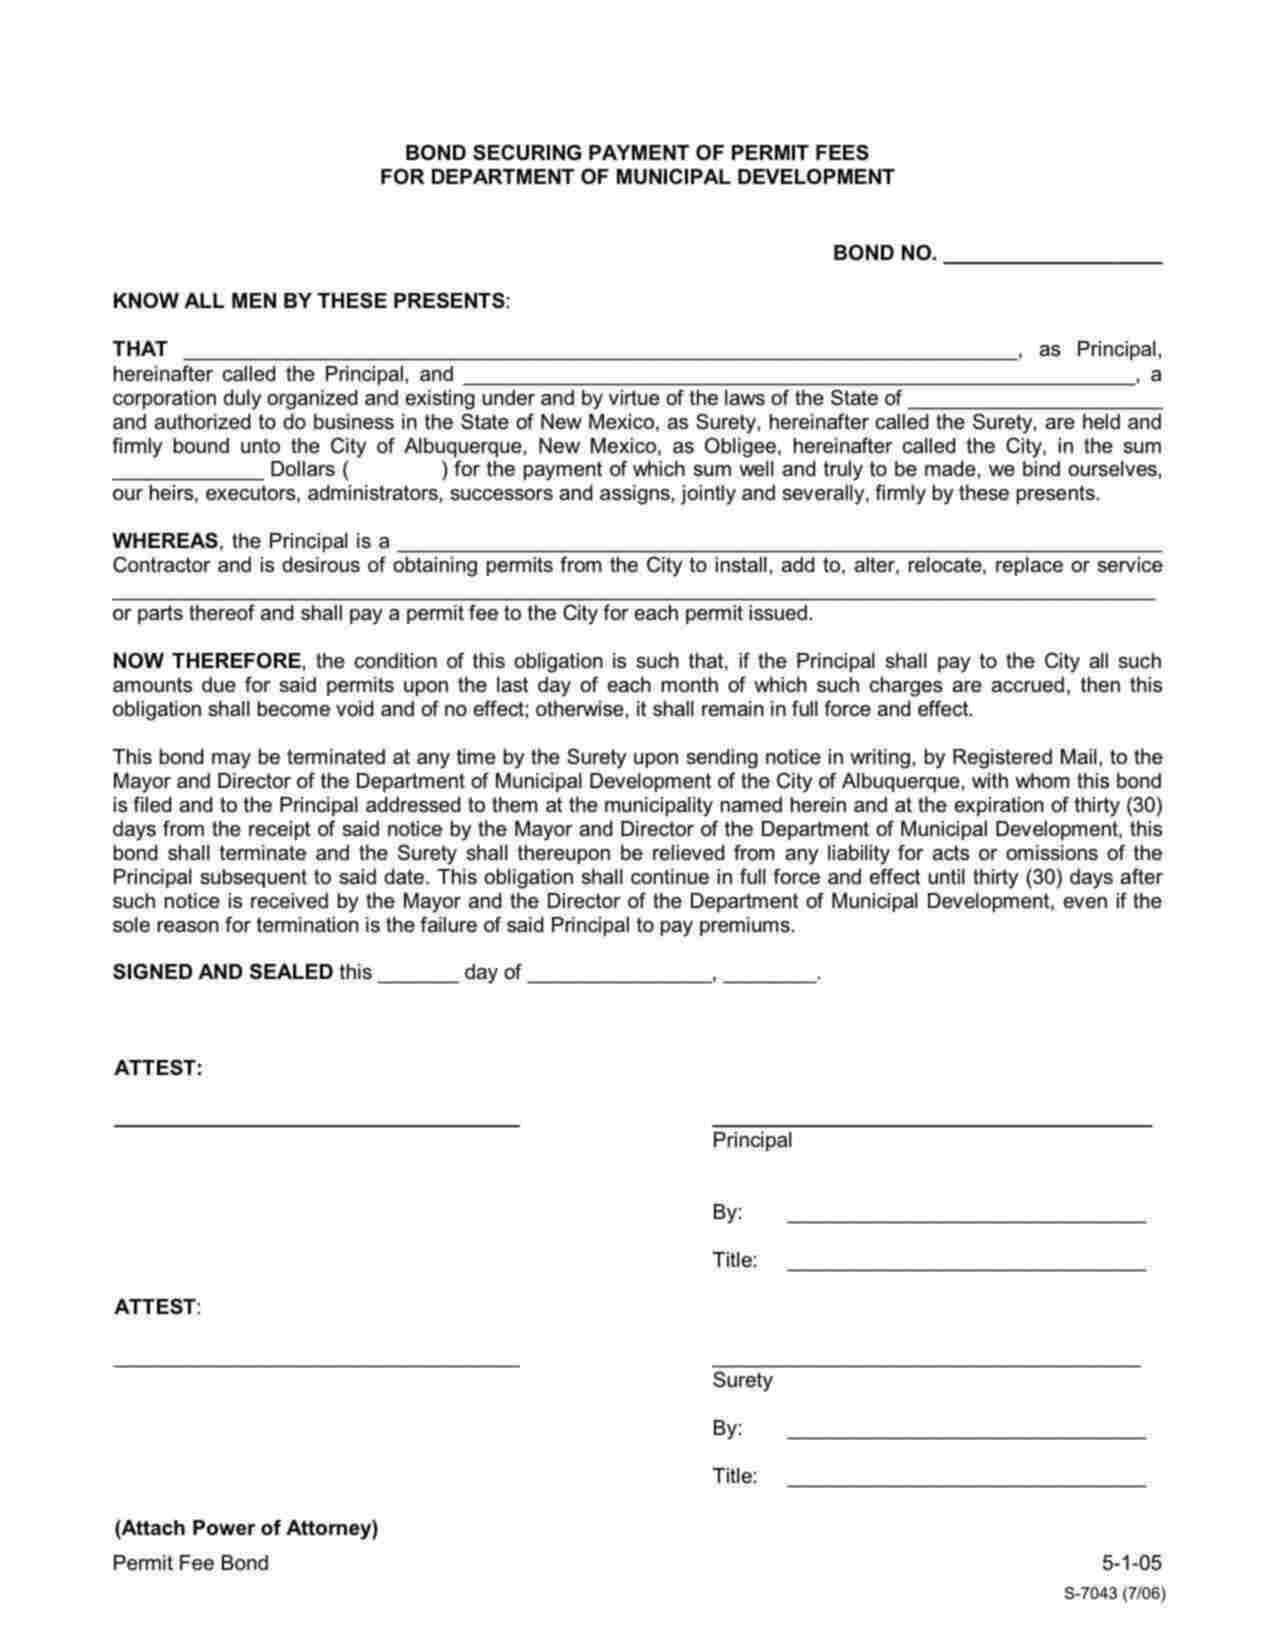 New Mexico Payment of Permit Fees for Department of Municipal Development Bond Form